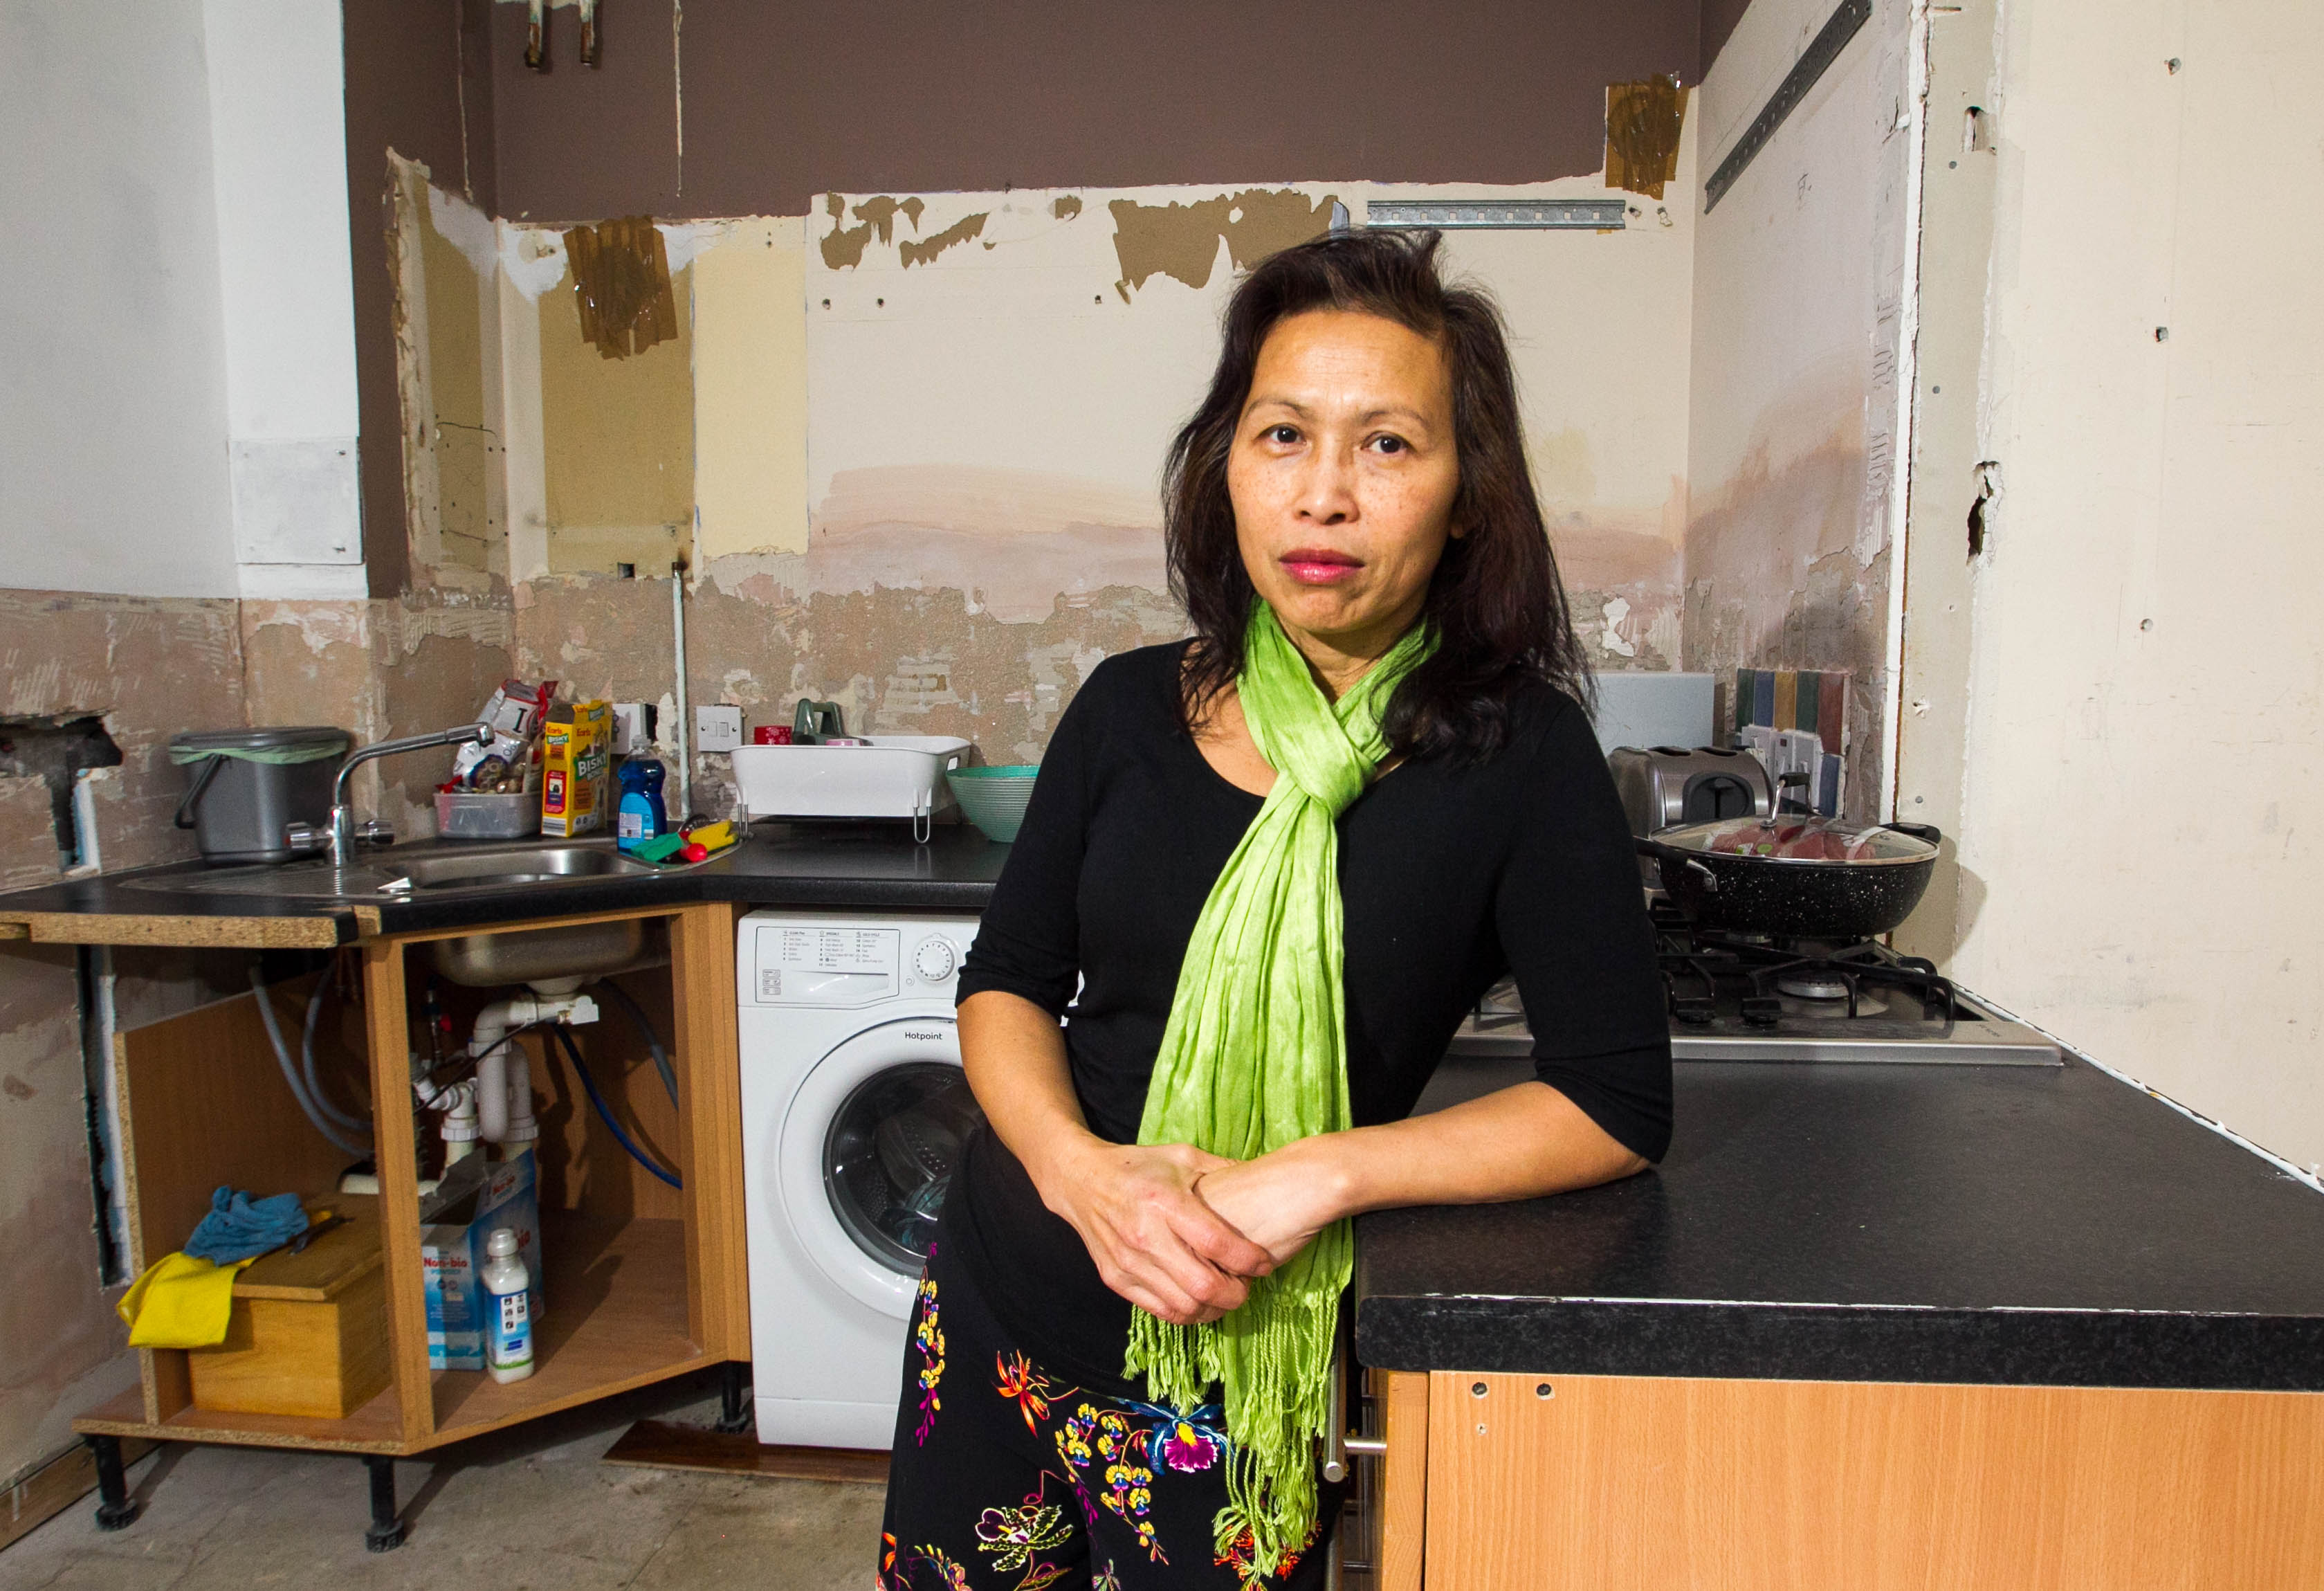 Sriwong Taylor has had her kitchen cancelled after it was half built. (Chris Austin)